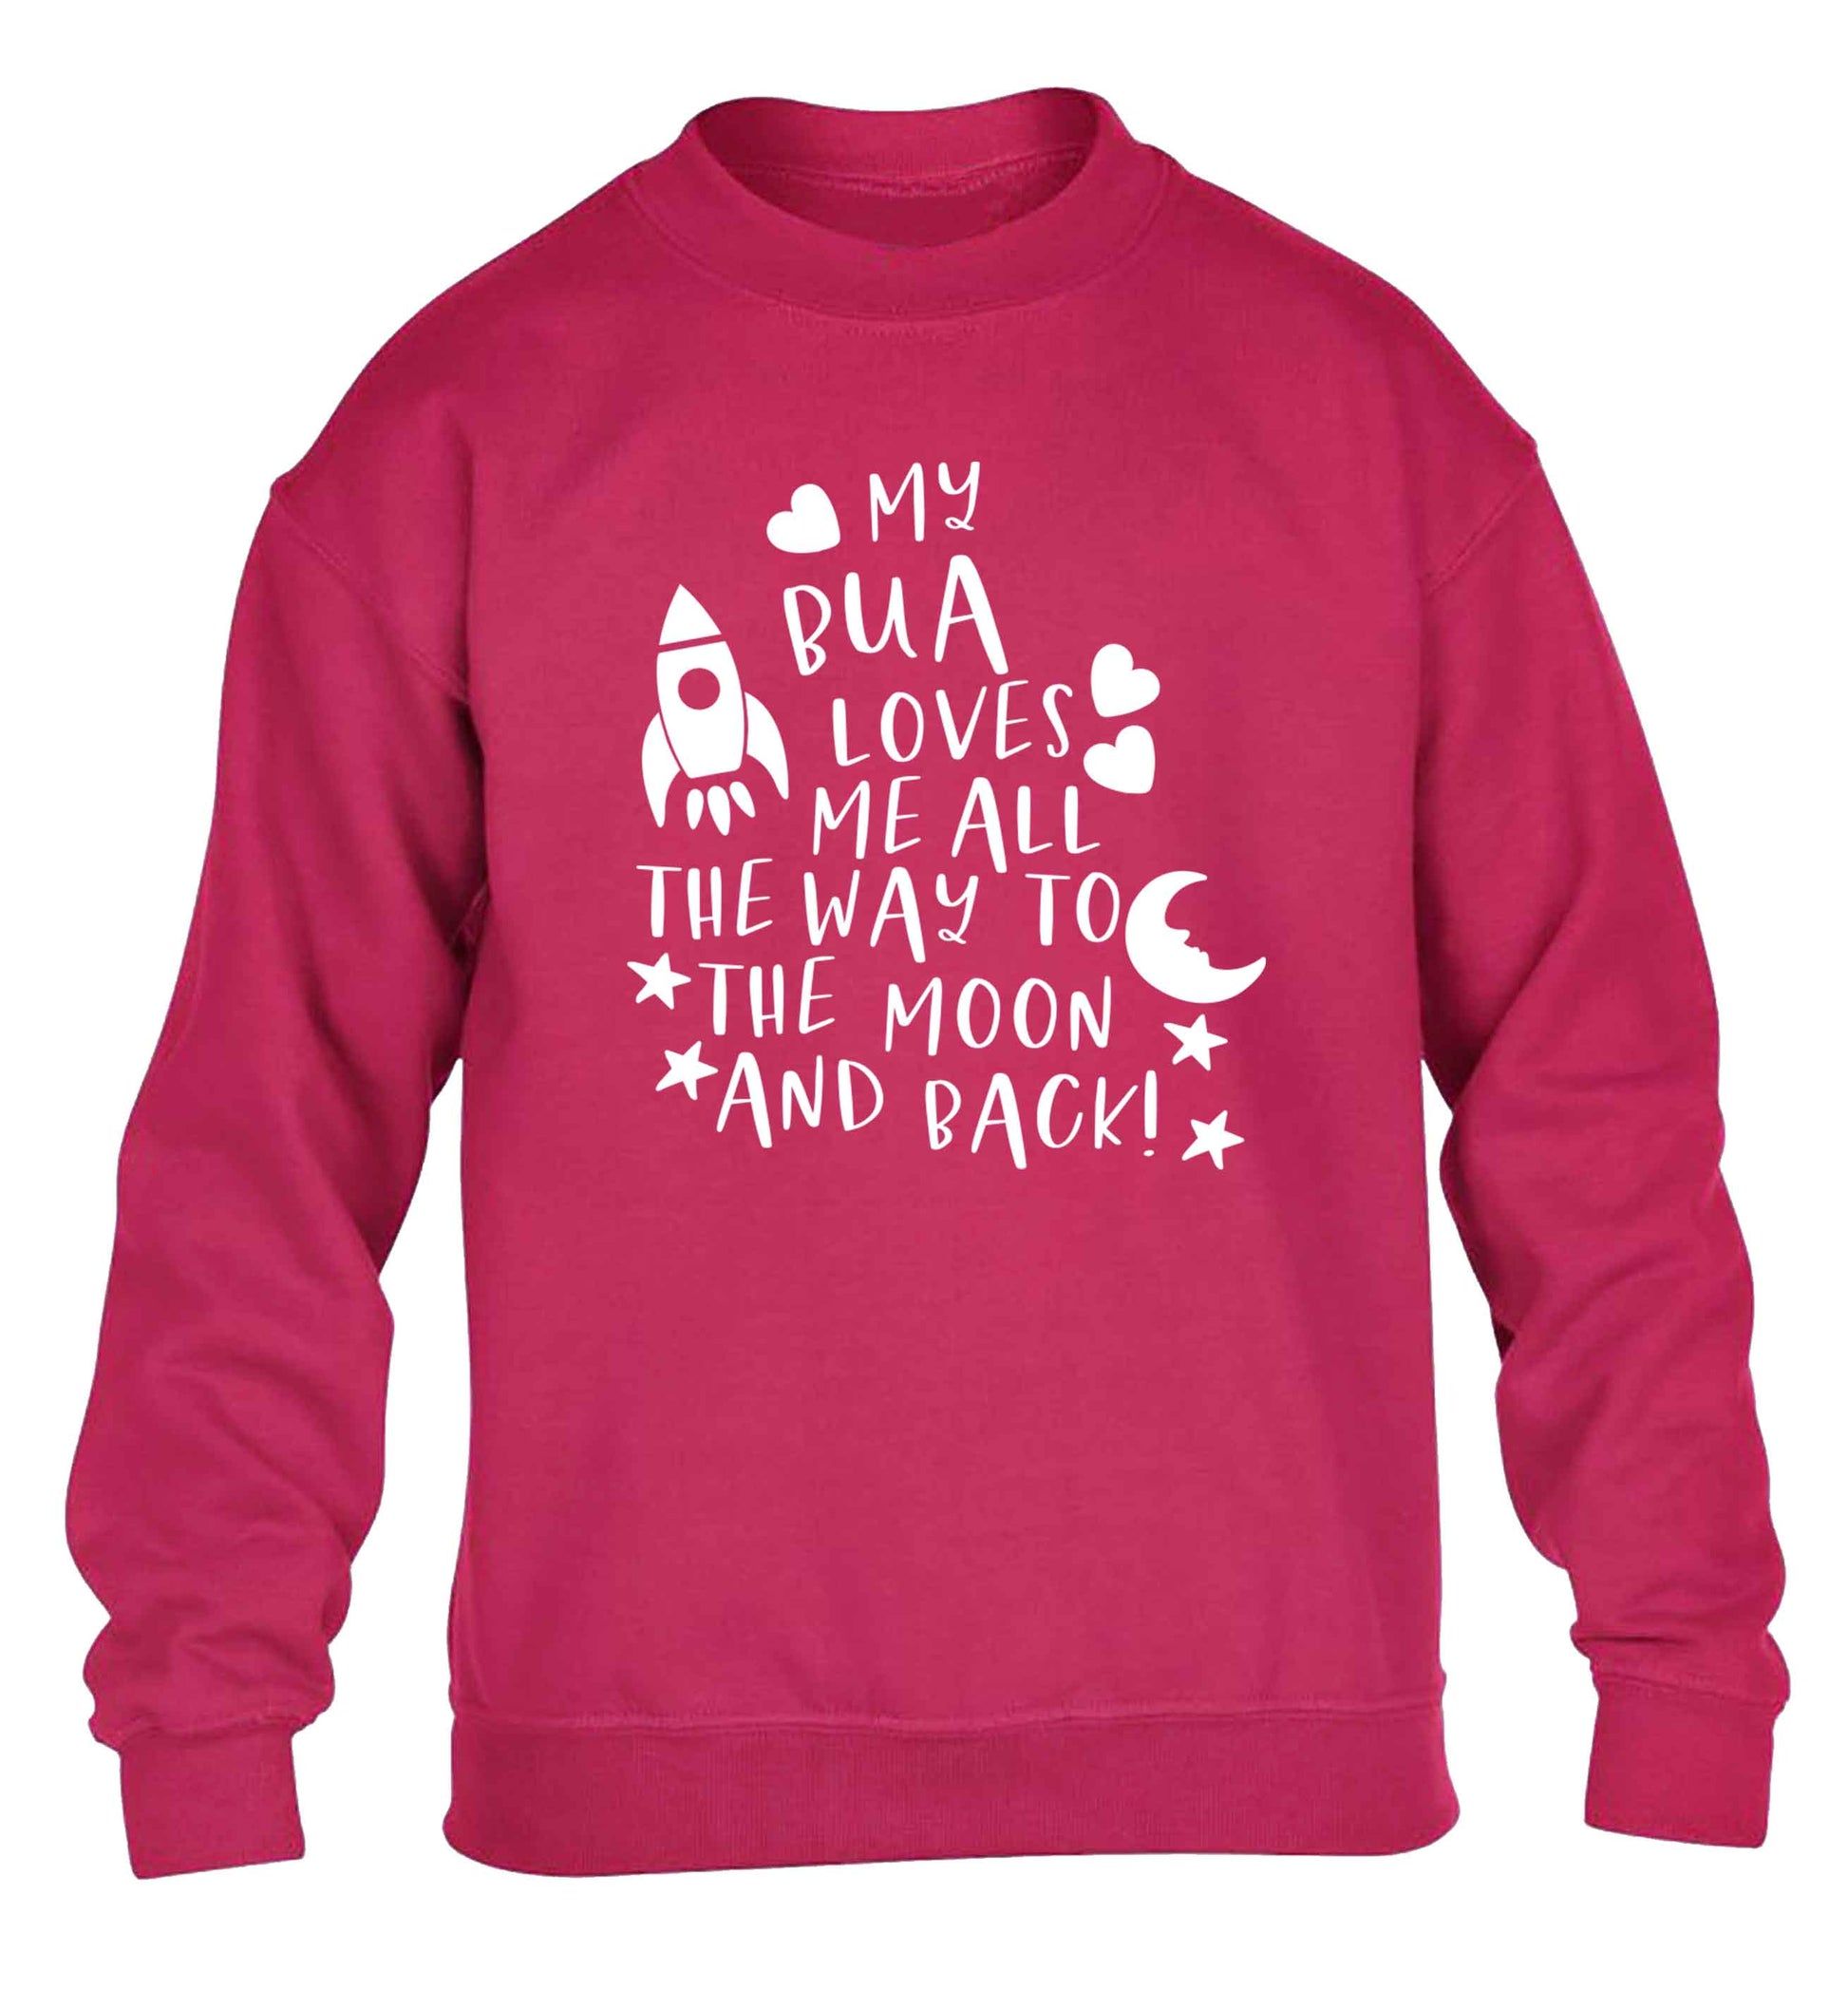 My bua loves me all they way to the moon and back children's pink sweater 12-13 Years